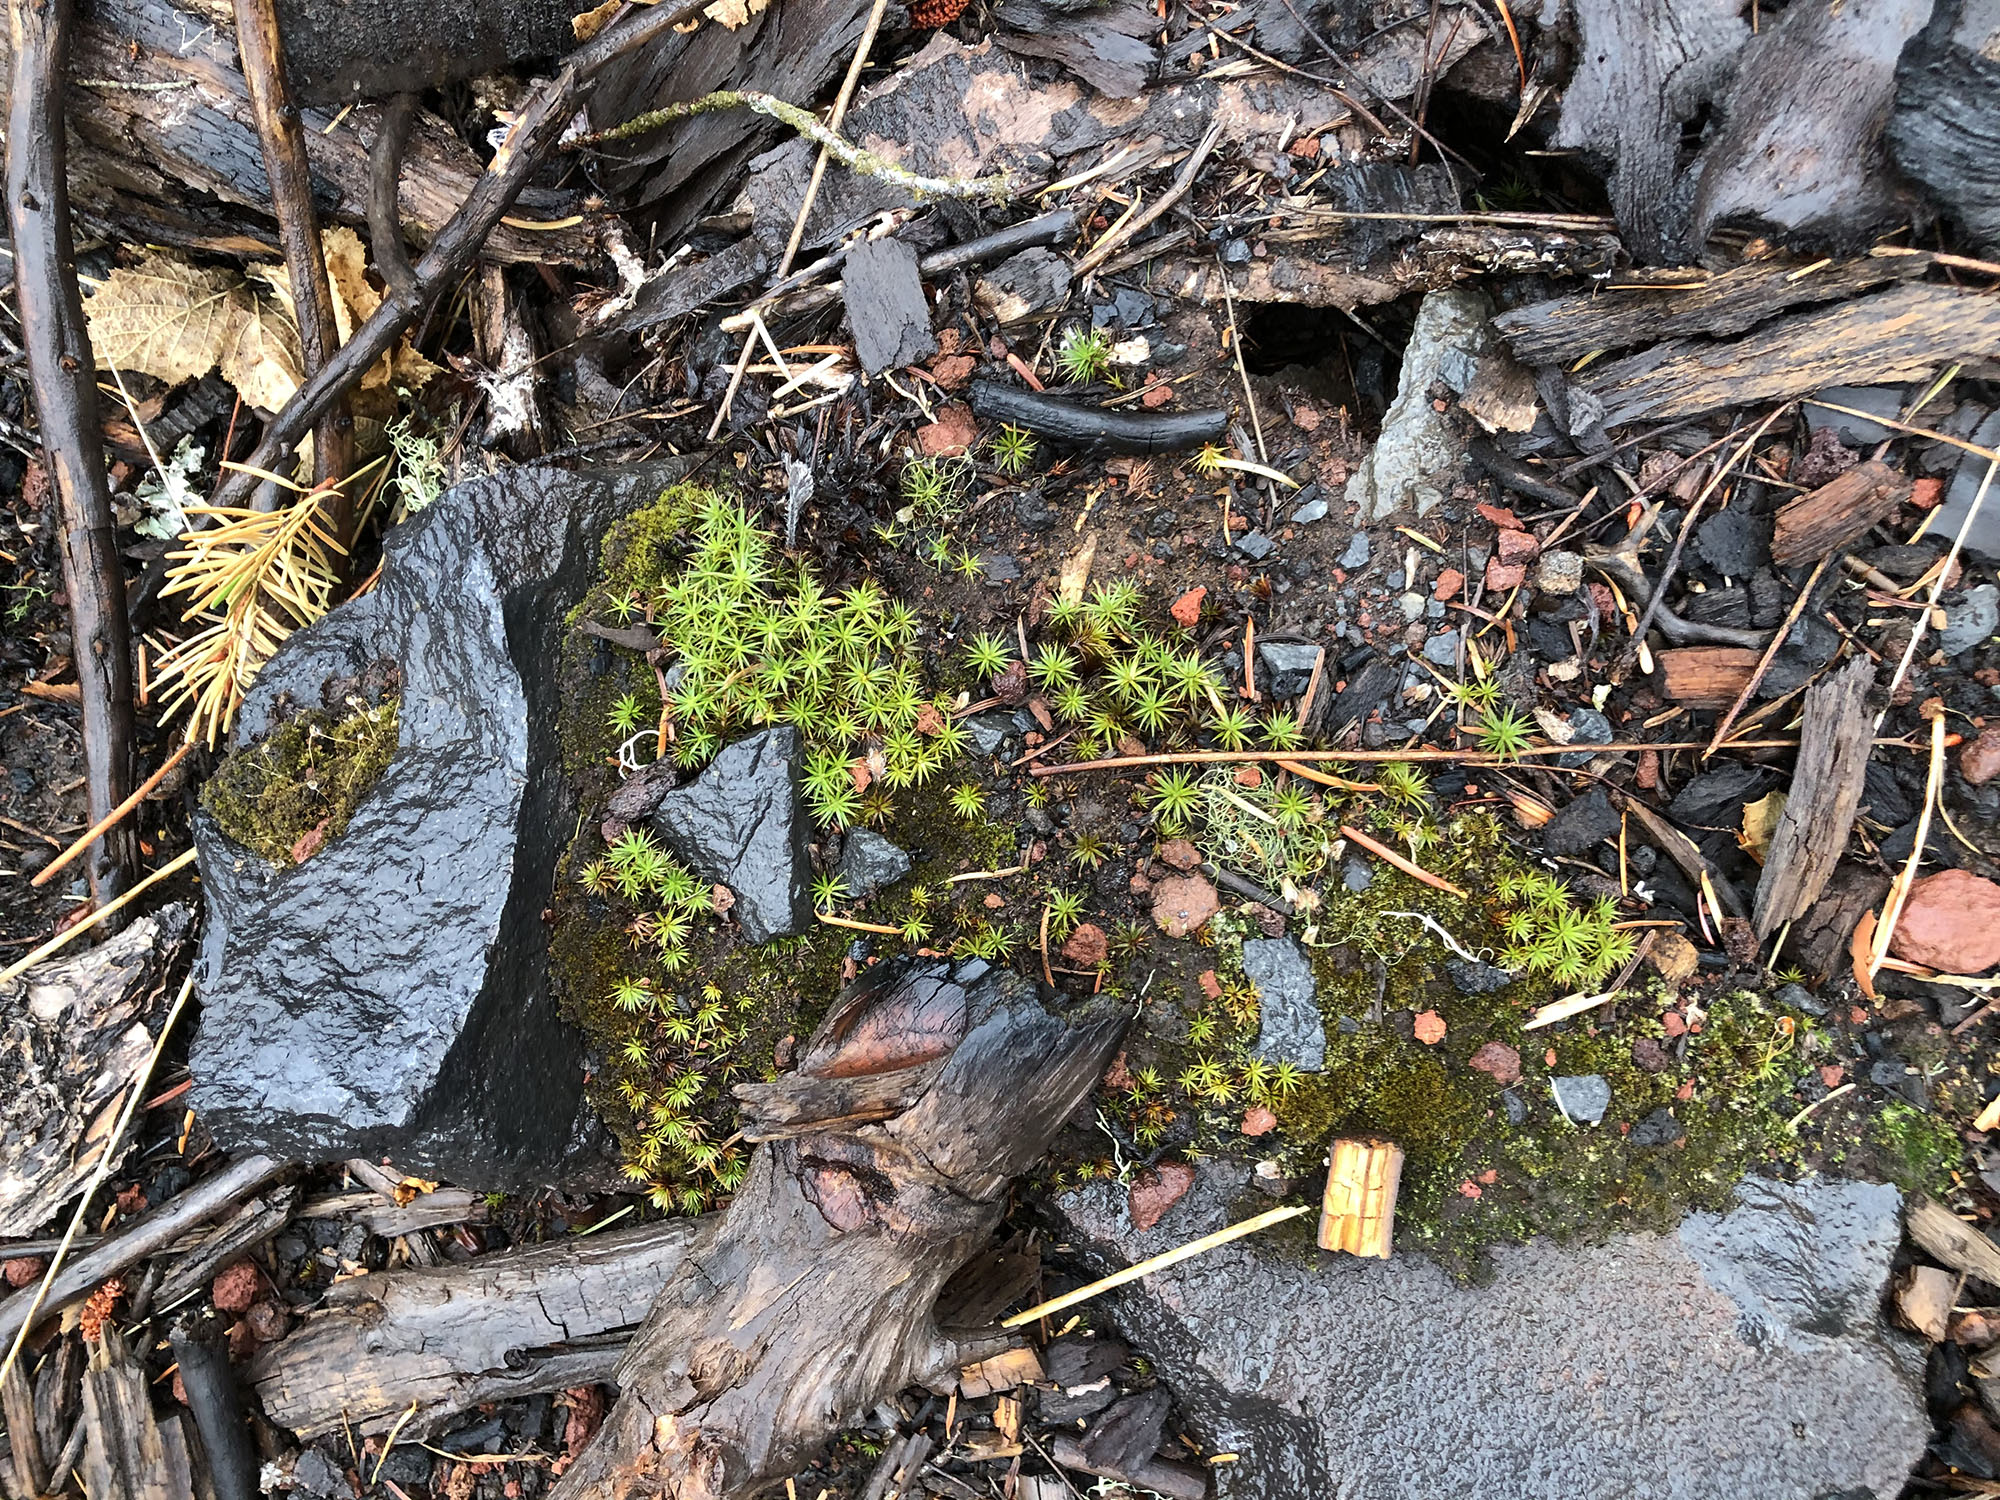 Even in areas that experienced fires in the past decade, moss plants are growing in damp crevices.